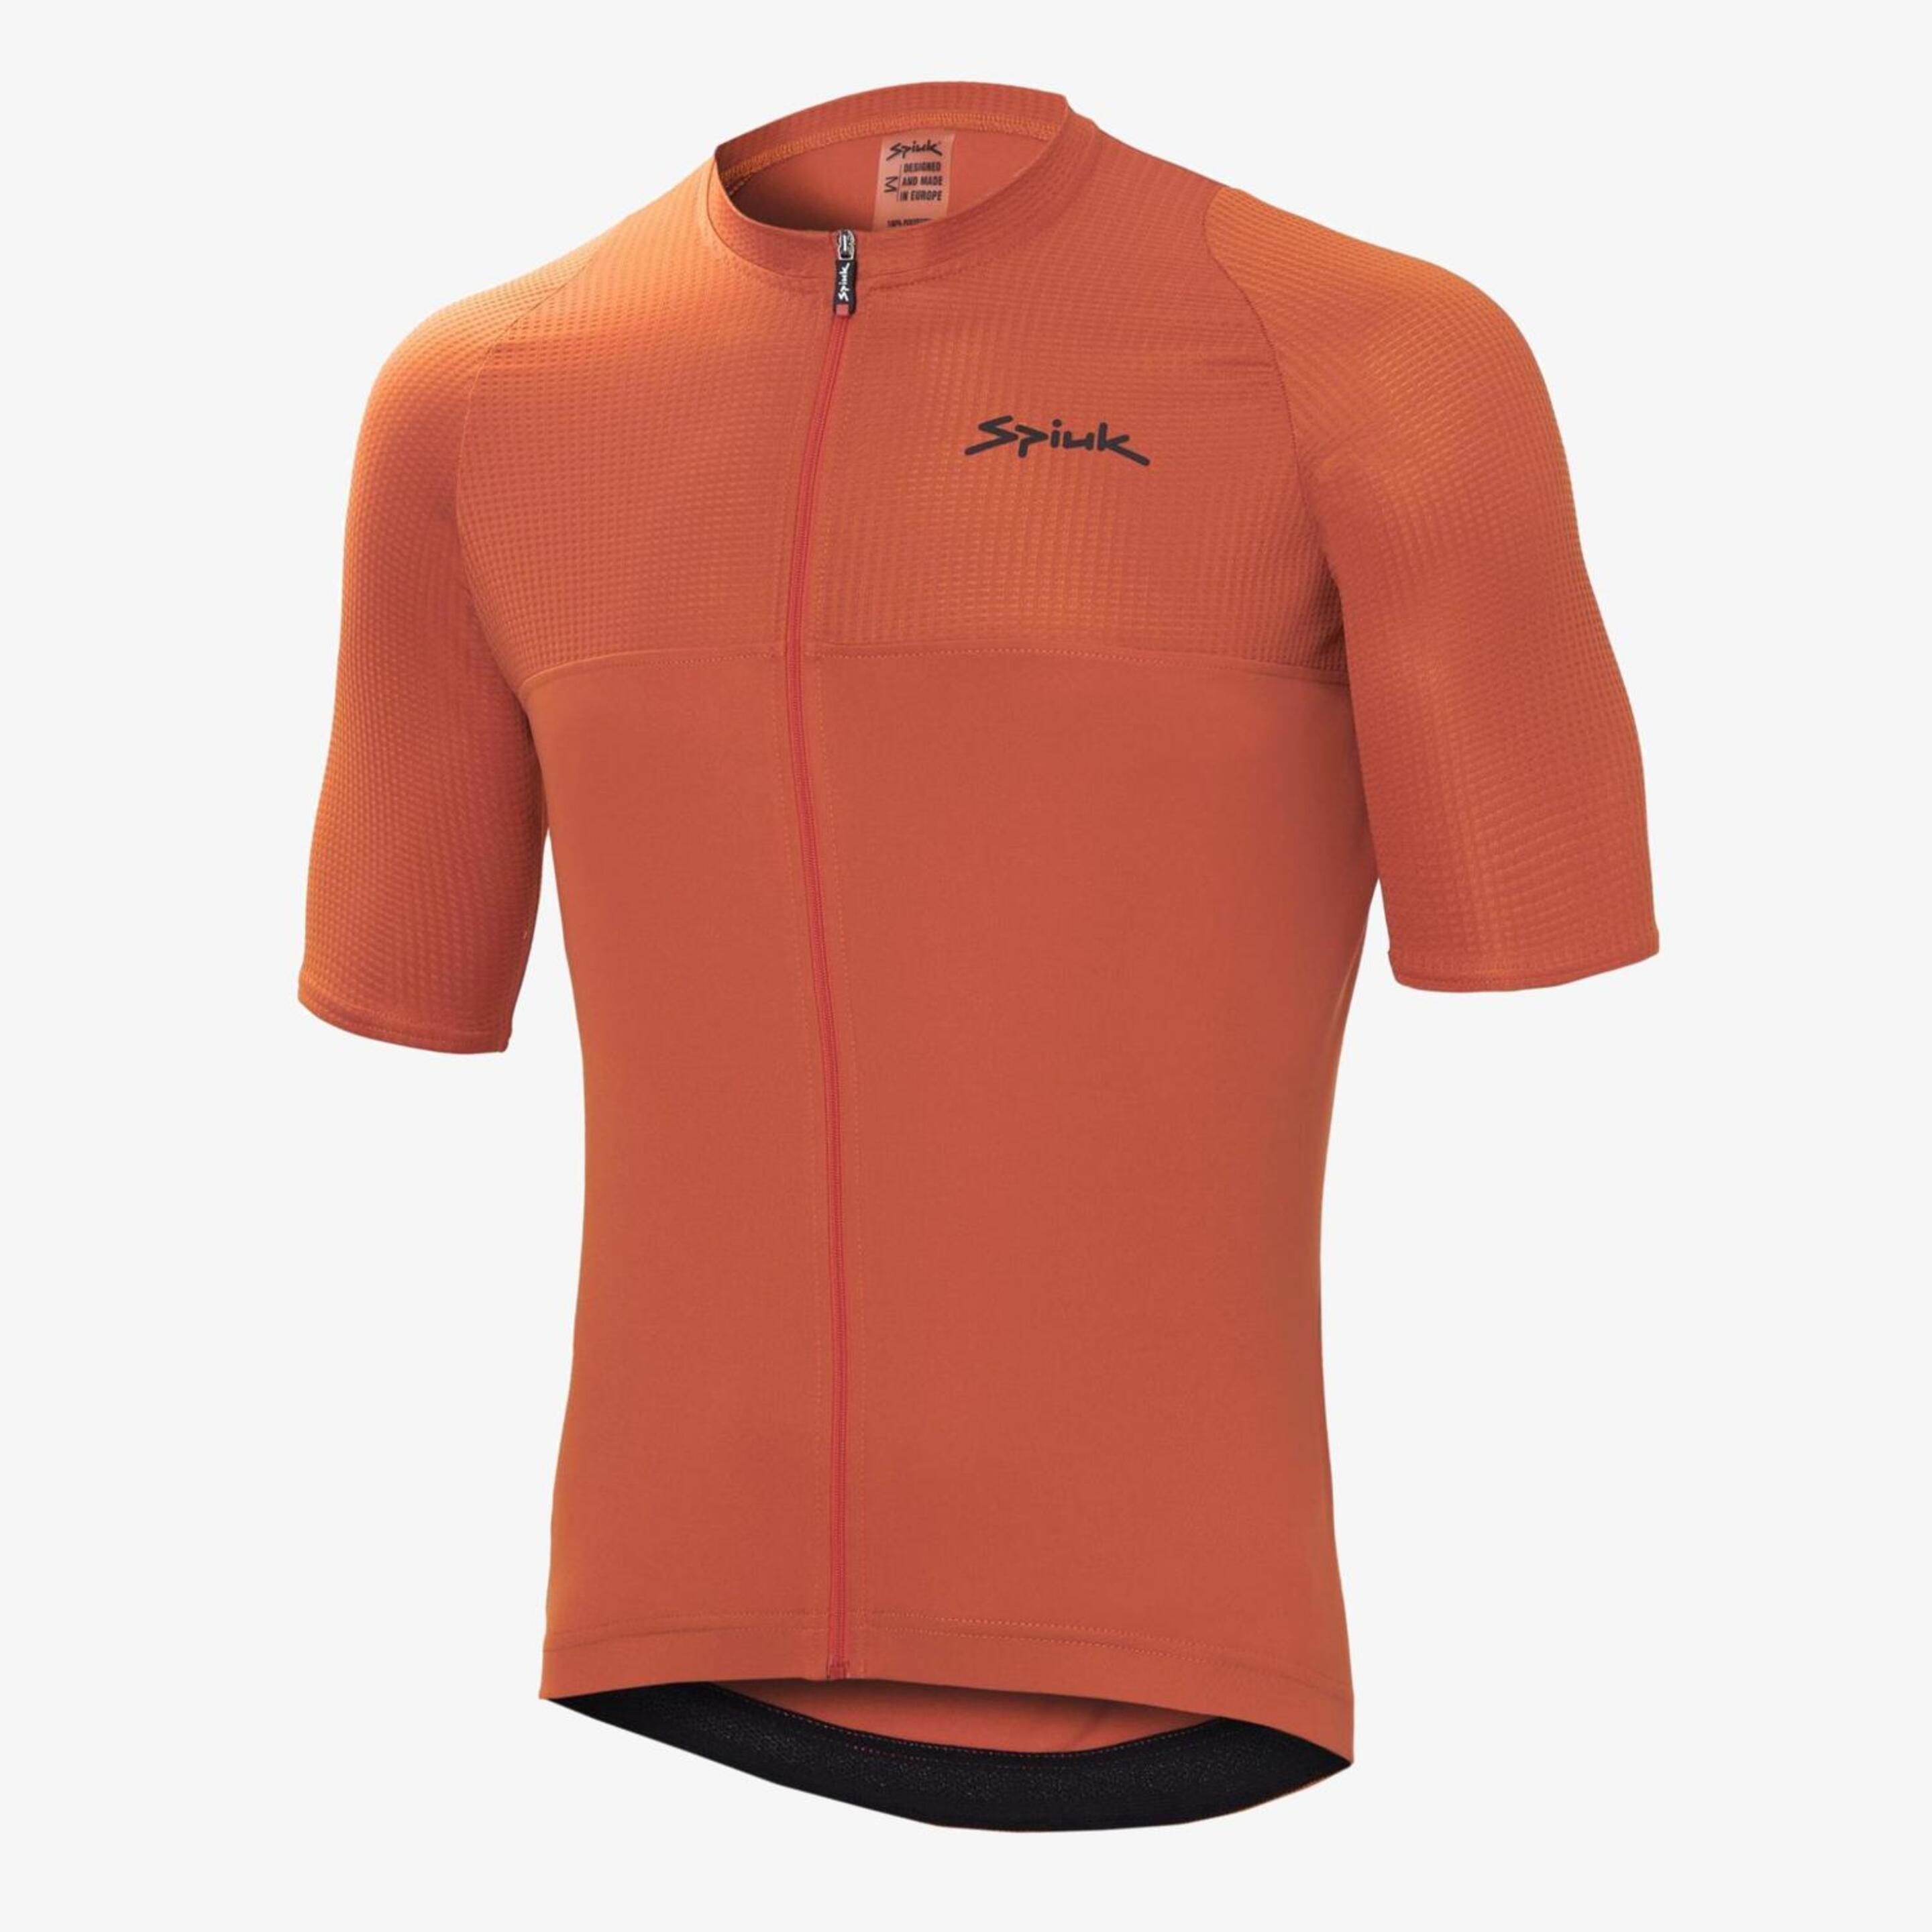 Spiuk Anatomic - rojo - Maillot Ciclismo Hombre